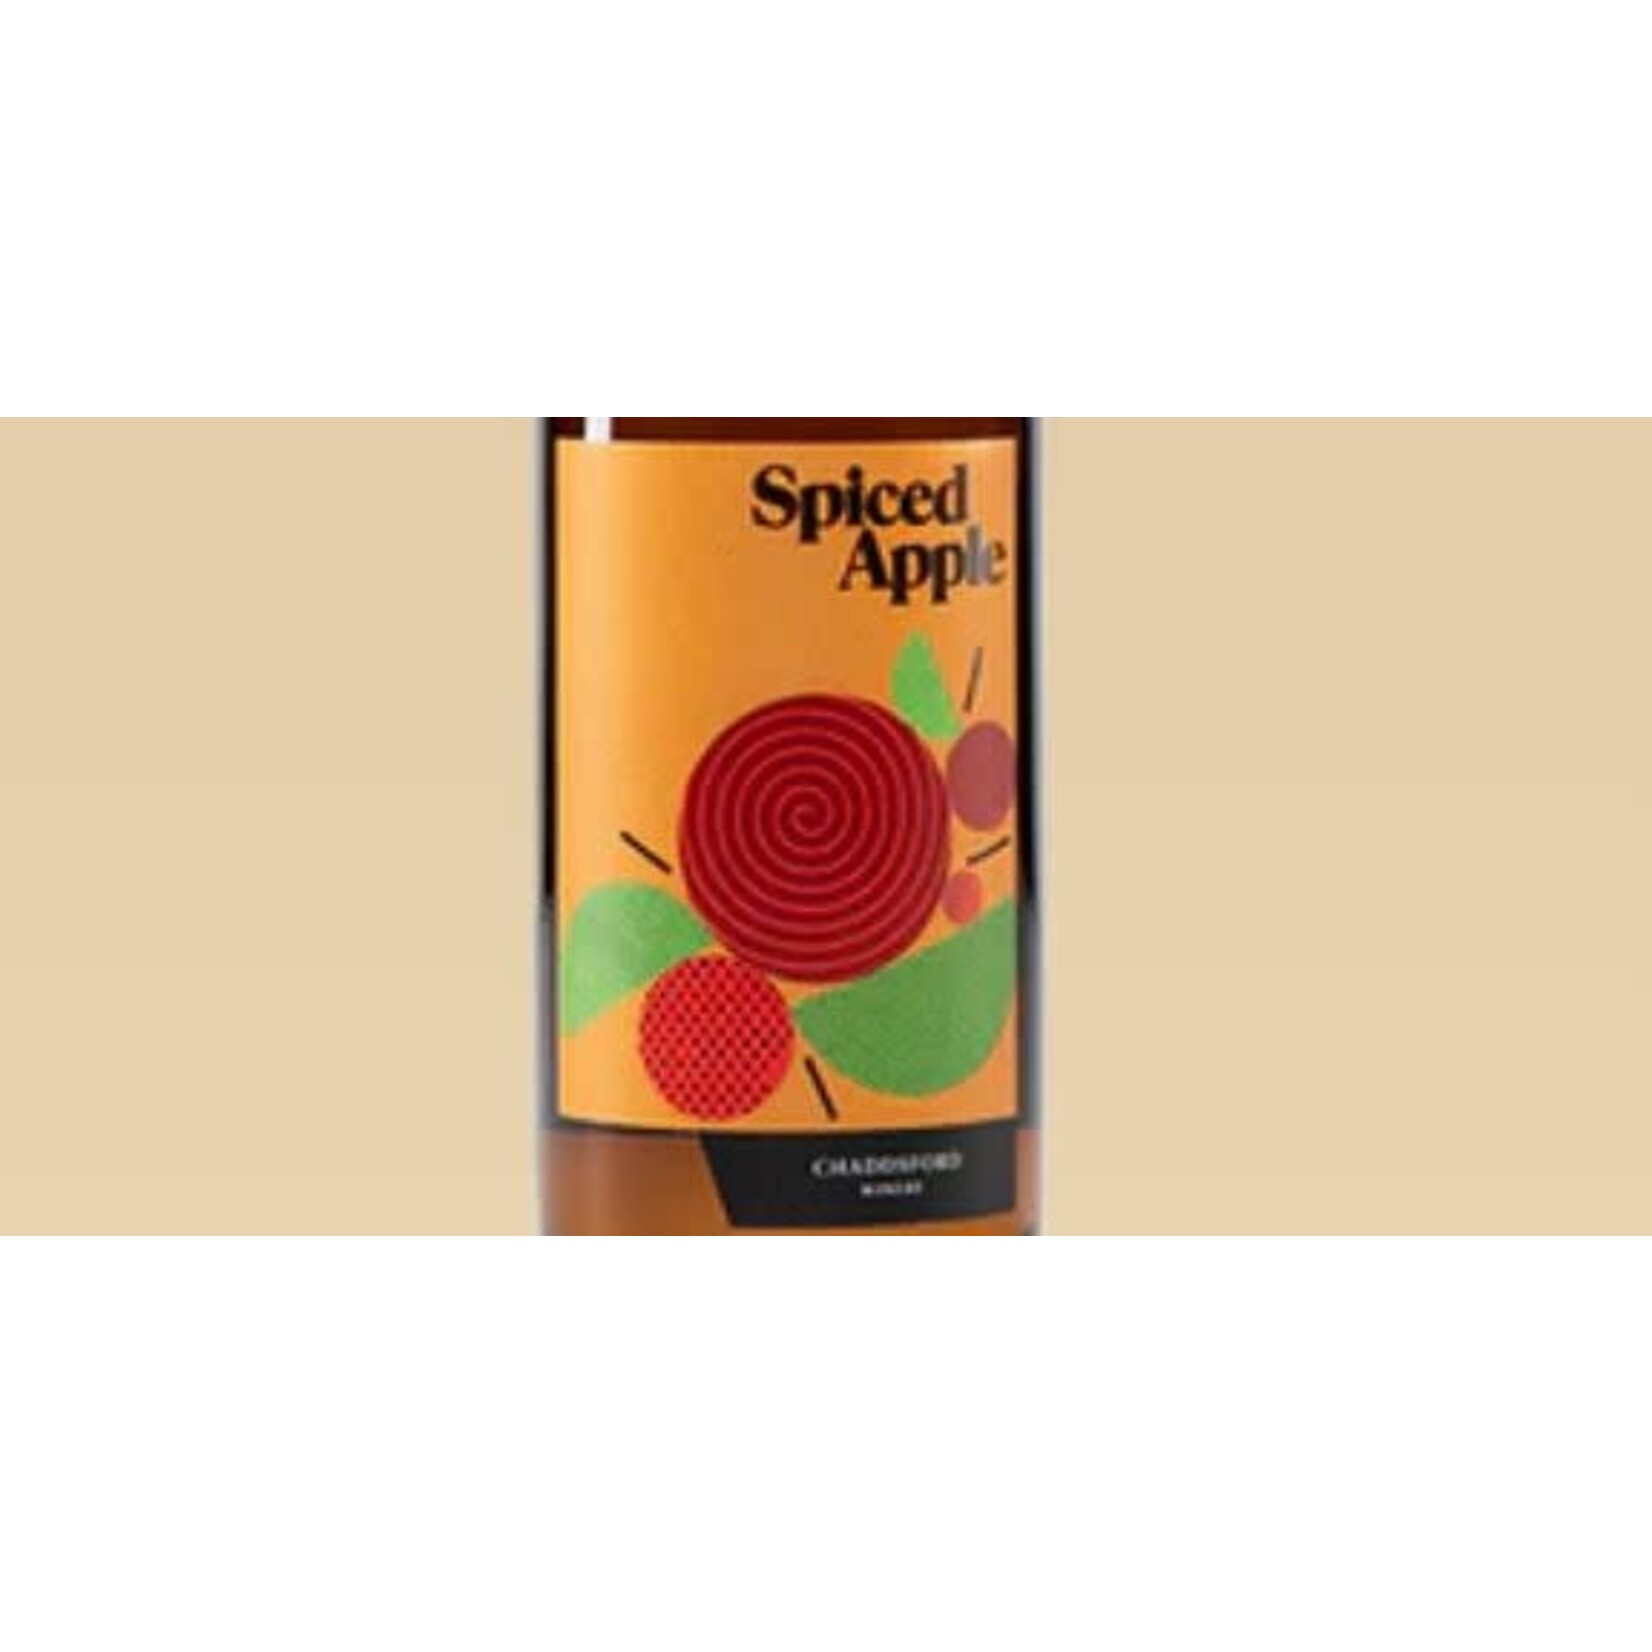 Chaddsford Winery Chaddsford Winery Spiced Apple with Cinnamon and Spice